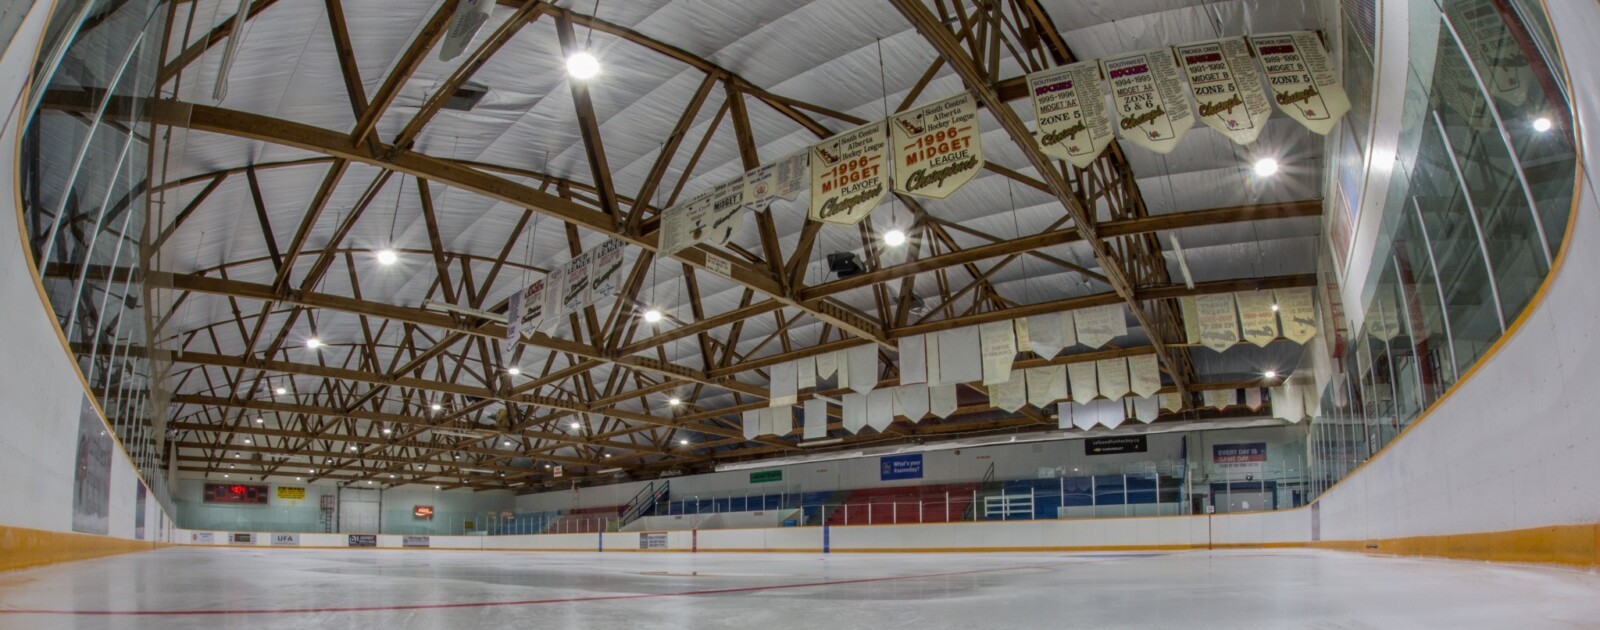 Town of Pincher Creek Upgrades Ice Arena to LED Lighting